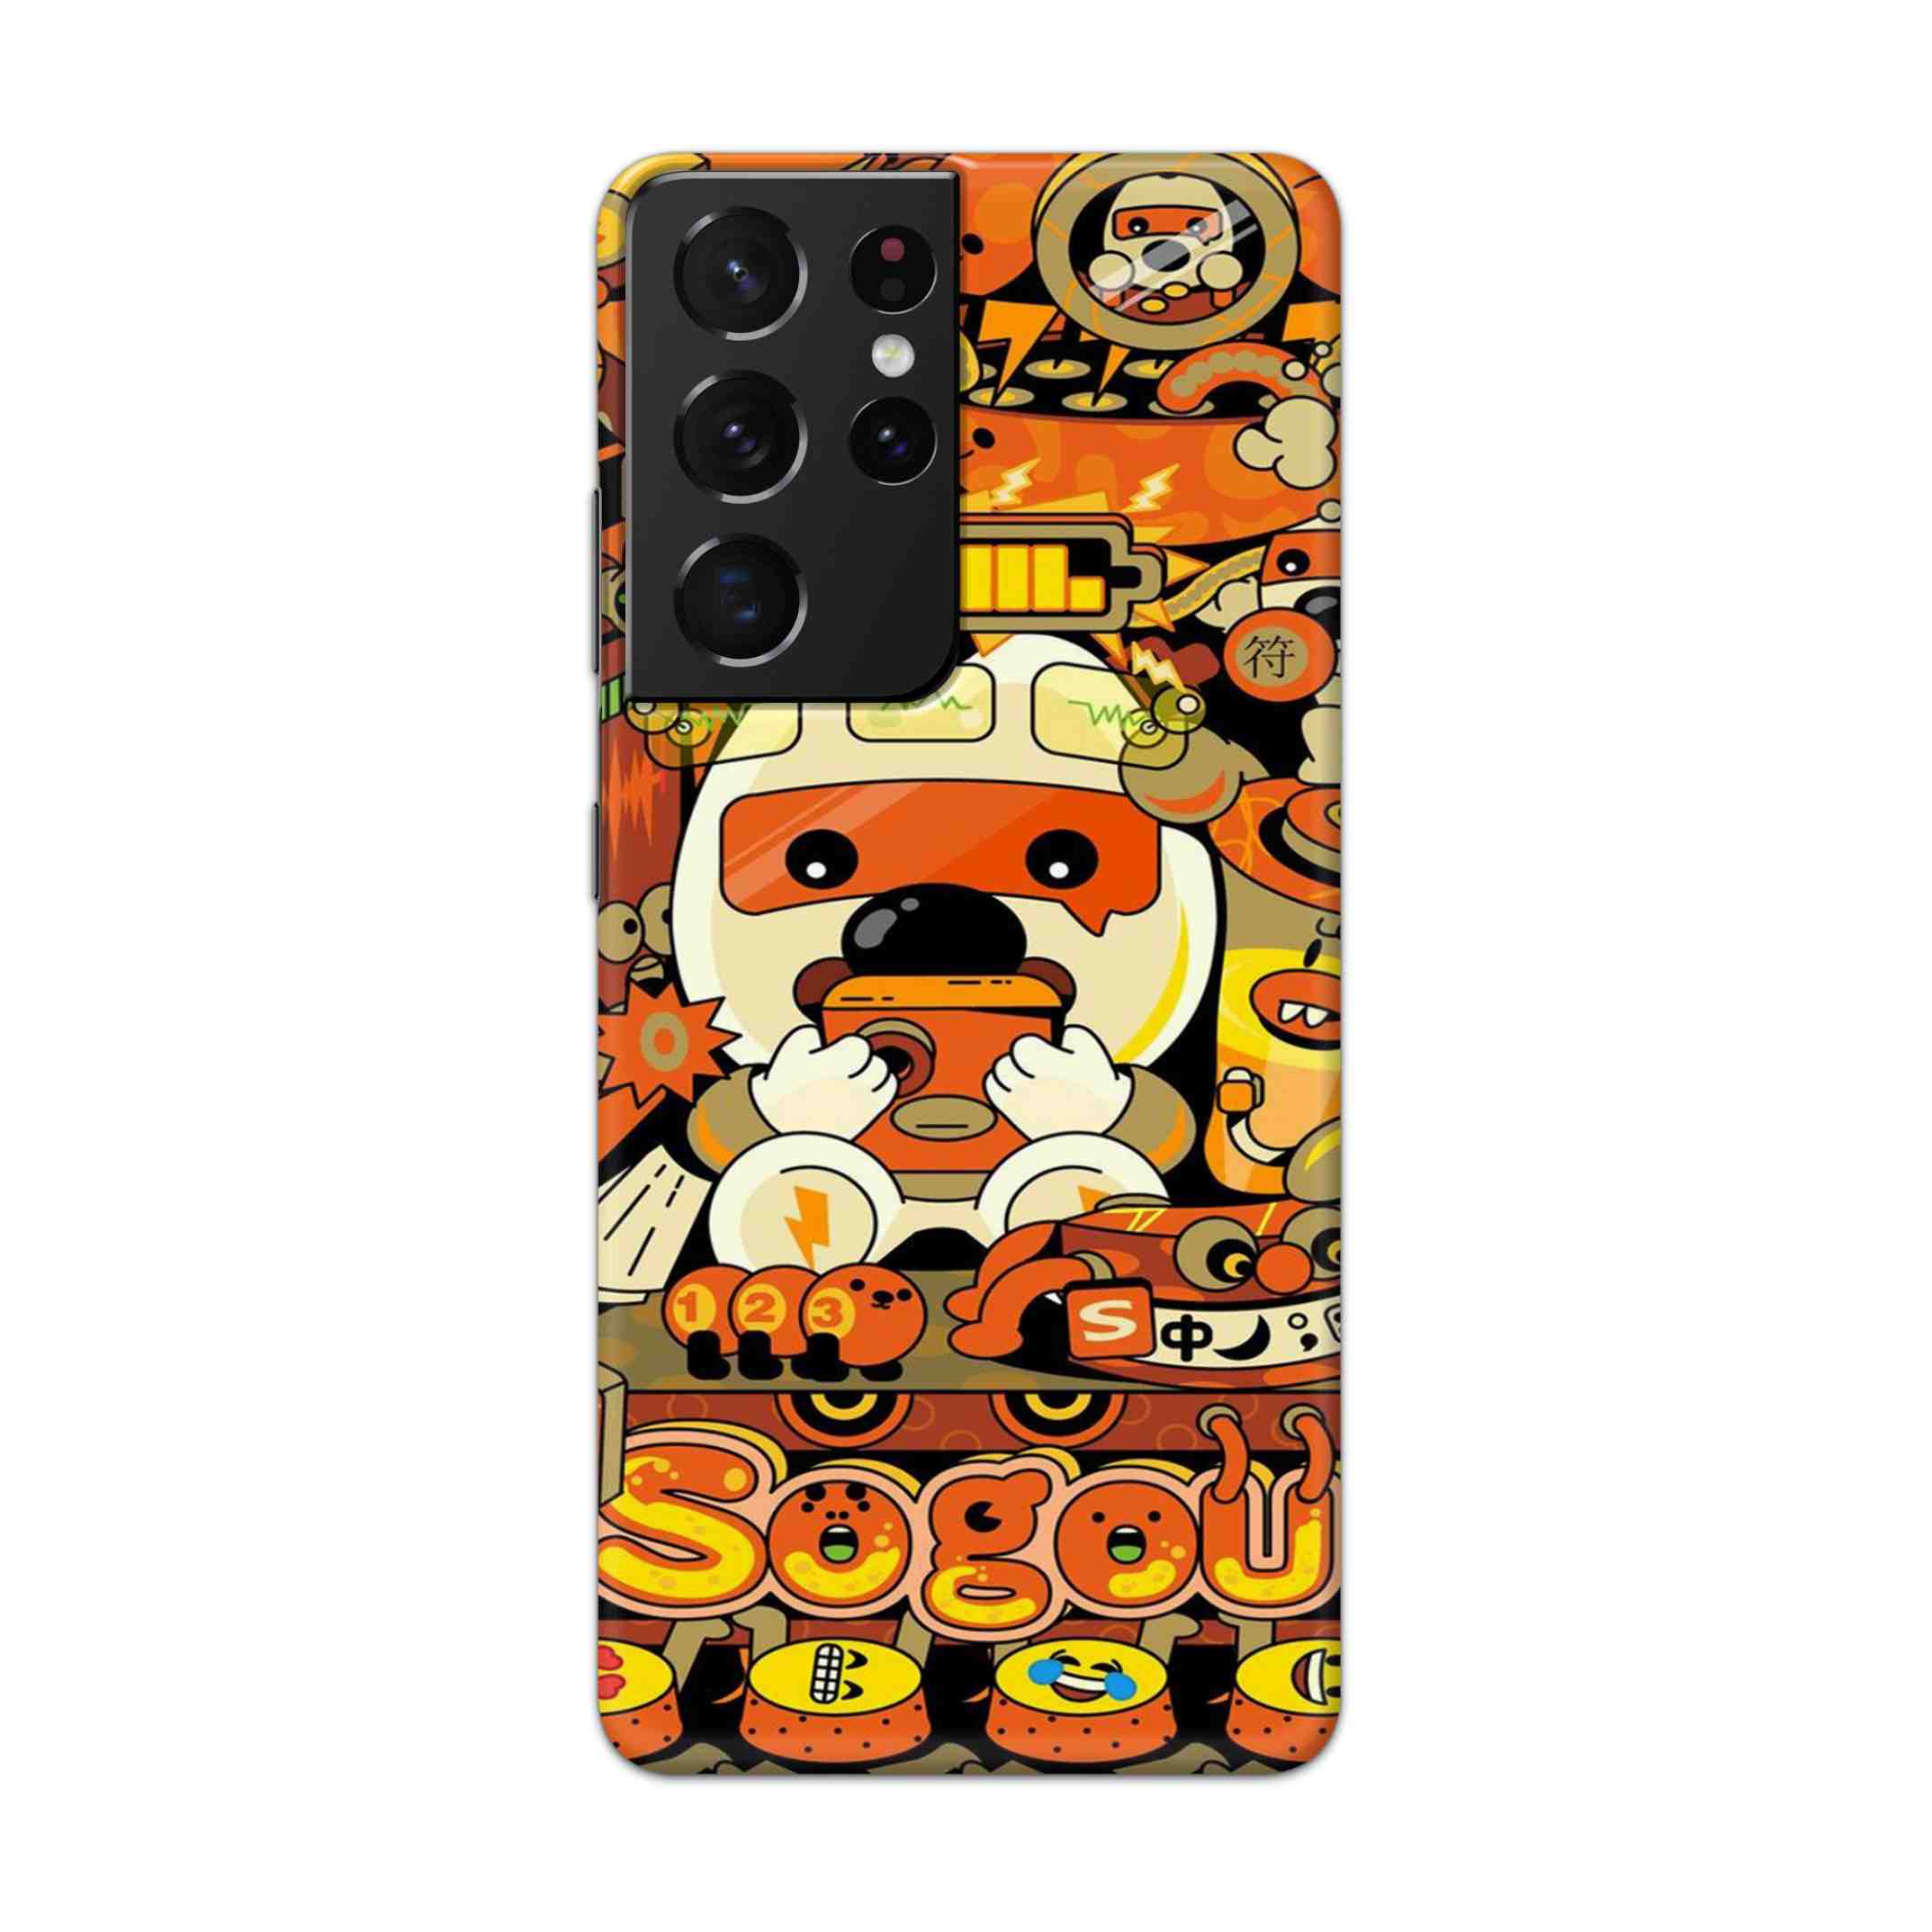 Buy Sogou Hard Back Mobile Phone Case Cover For Samsung Galaxy S21 Ultra Online